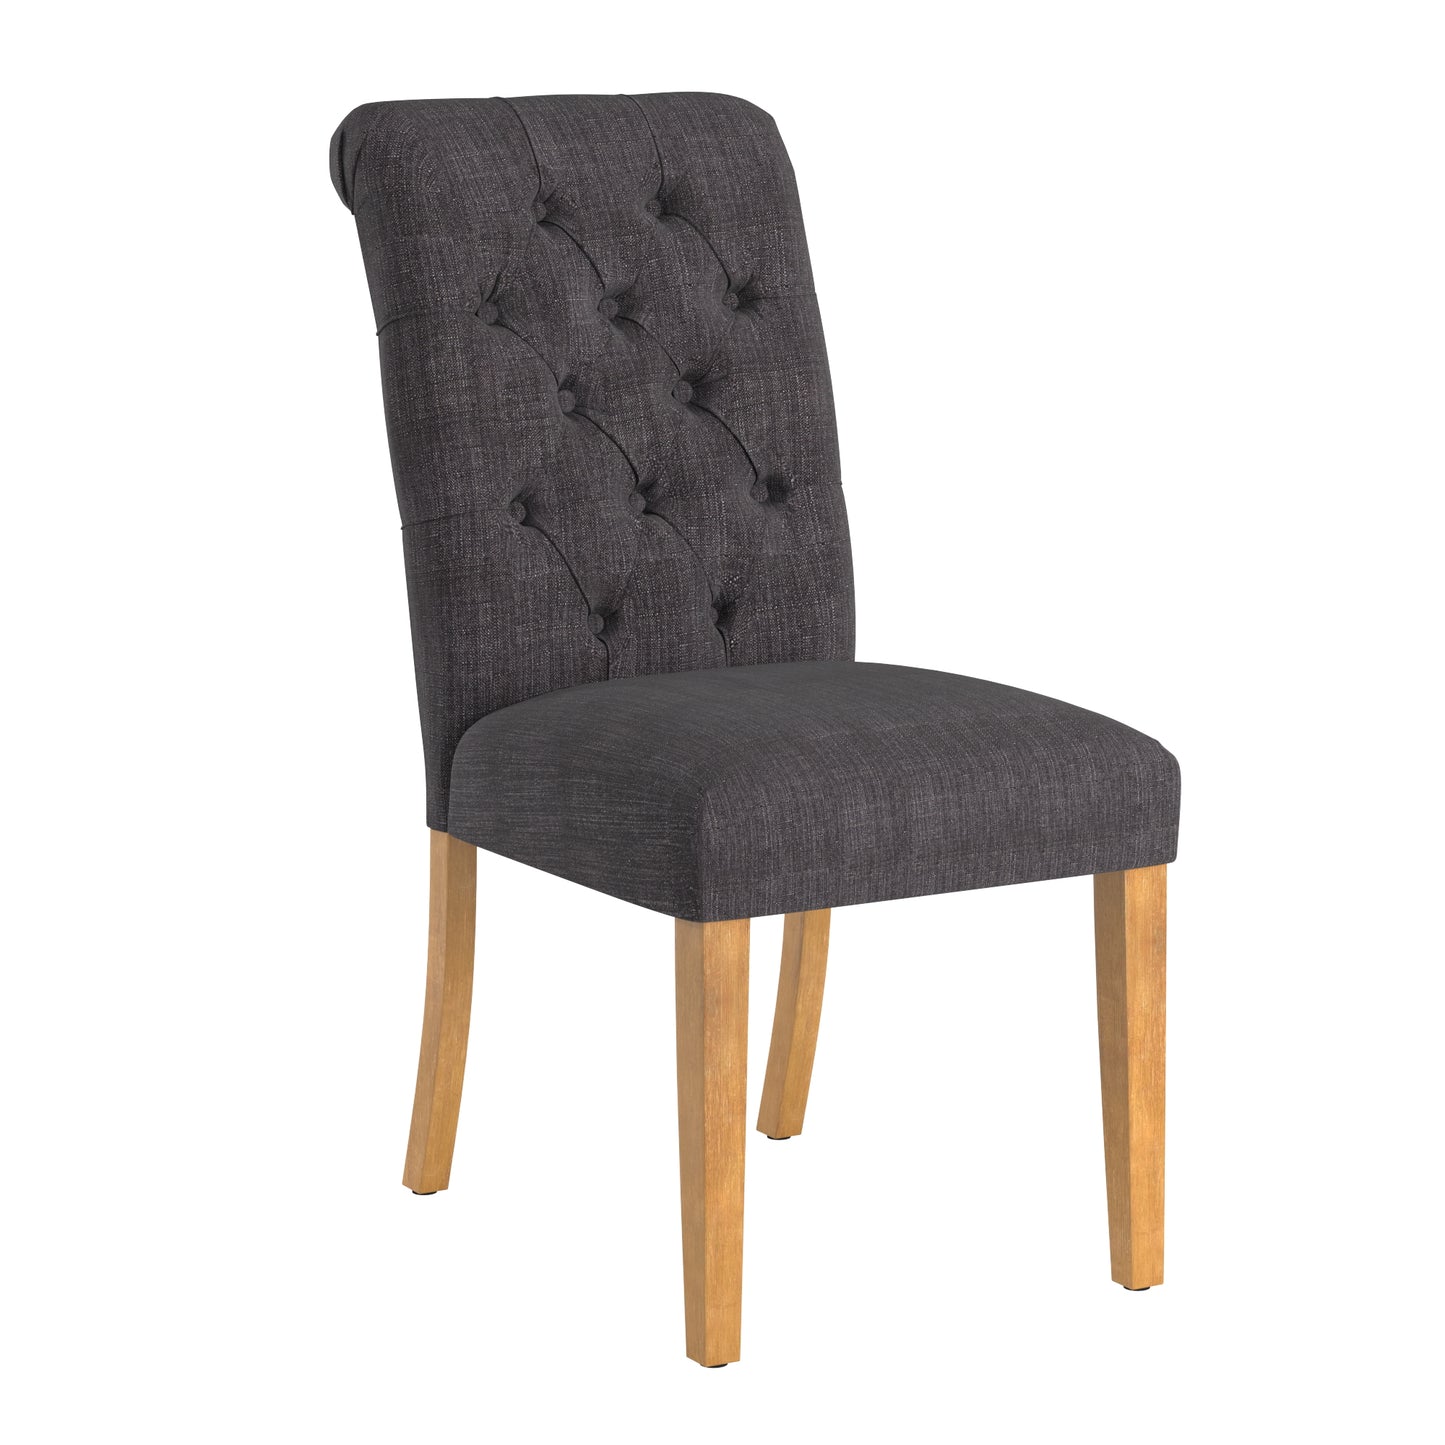 Premium Tufted Rolled Back Parsons Chairs (Set of 2) - Dark Grey Linen